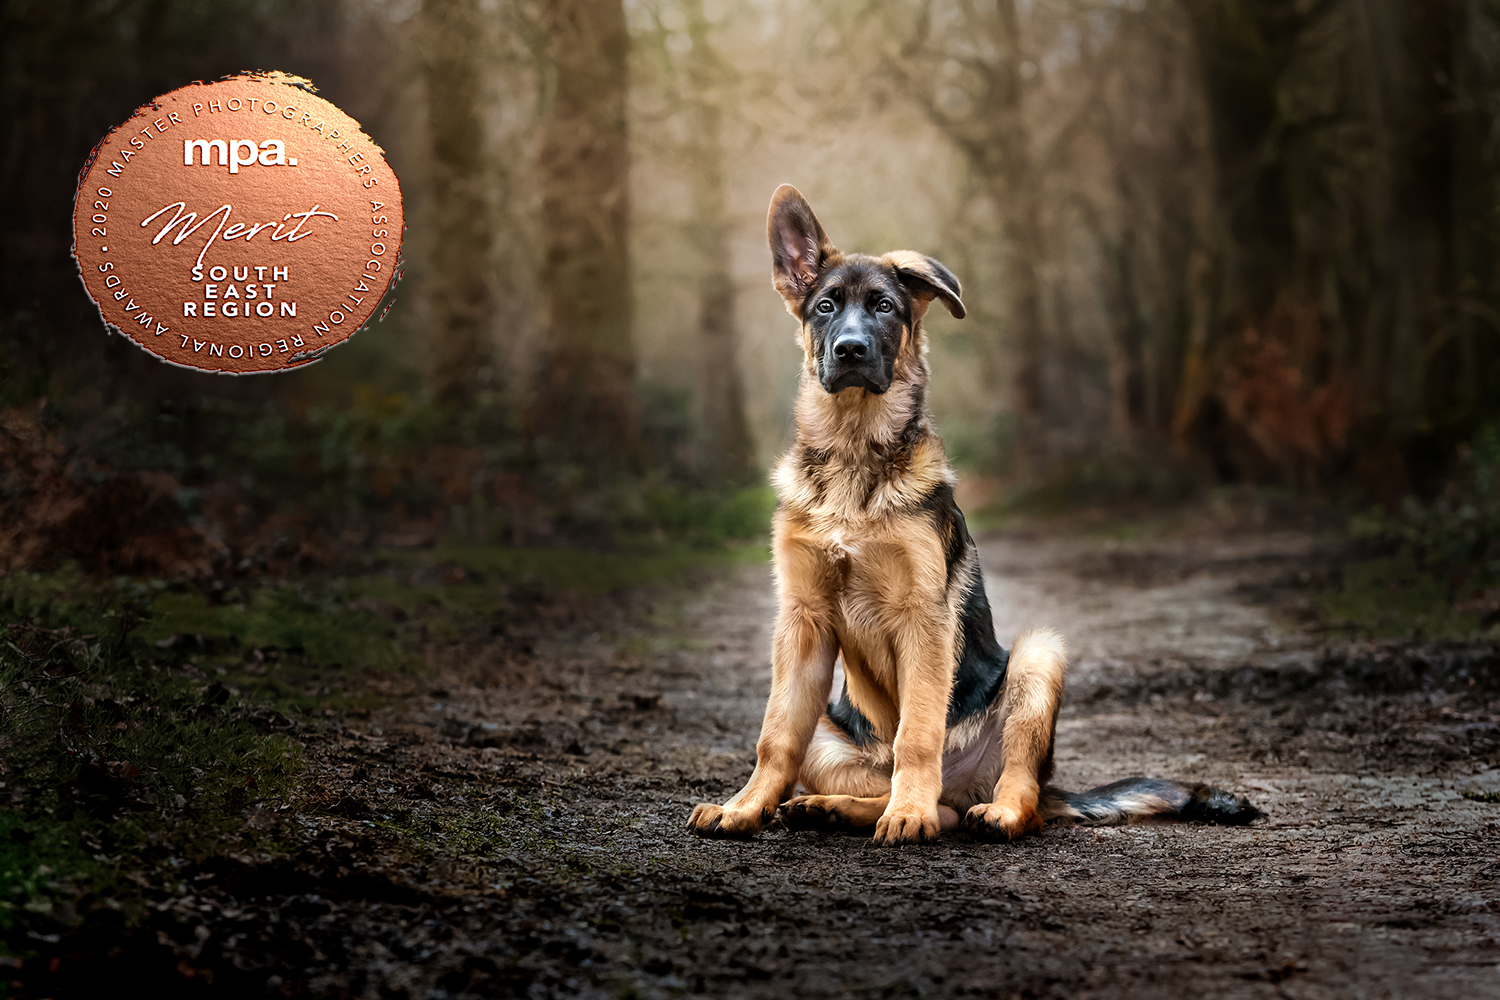 Nic Bisseker Photography Dog photoshoot East Grinstead